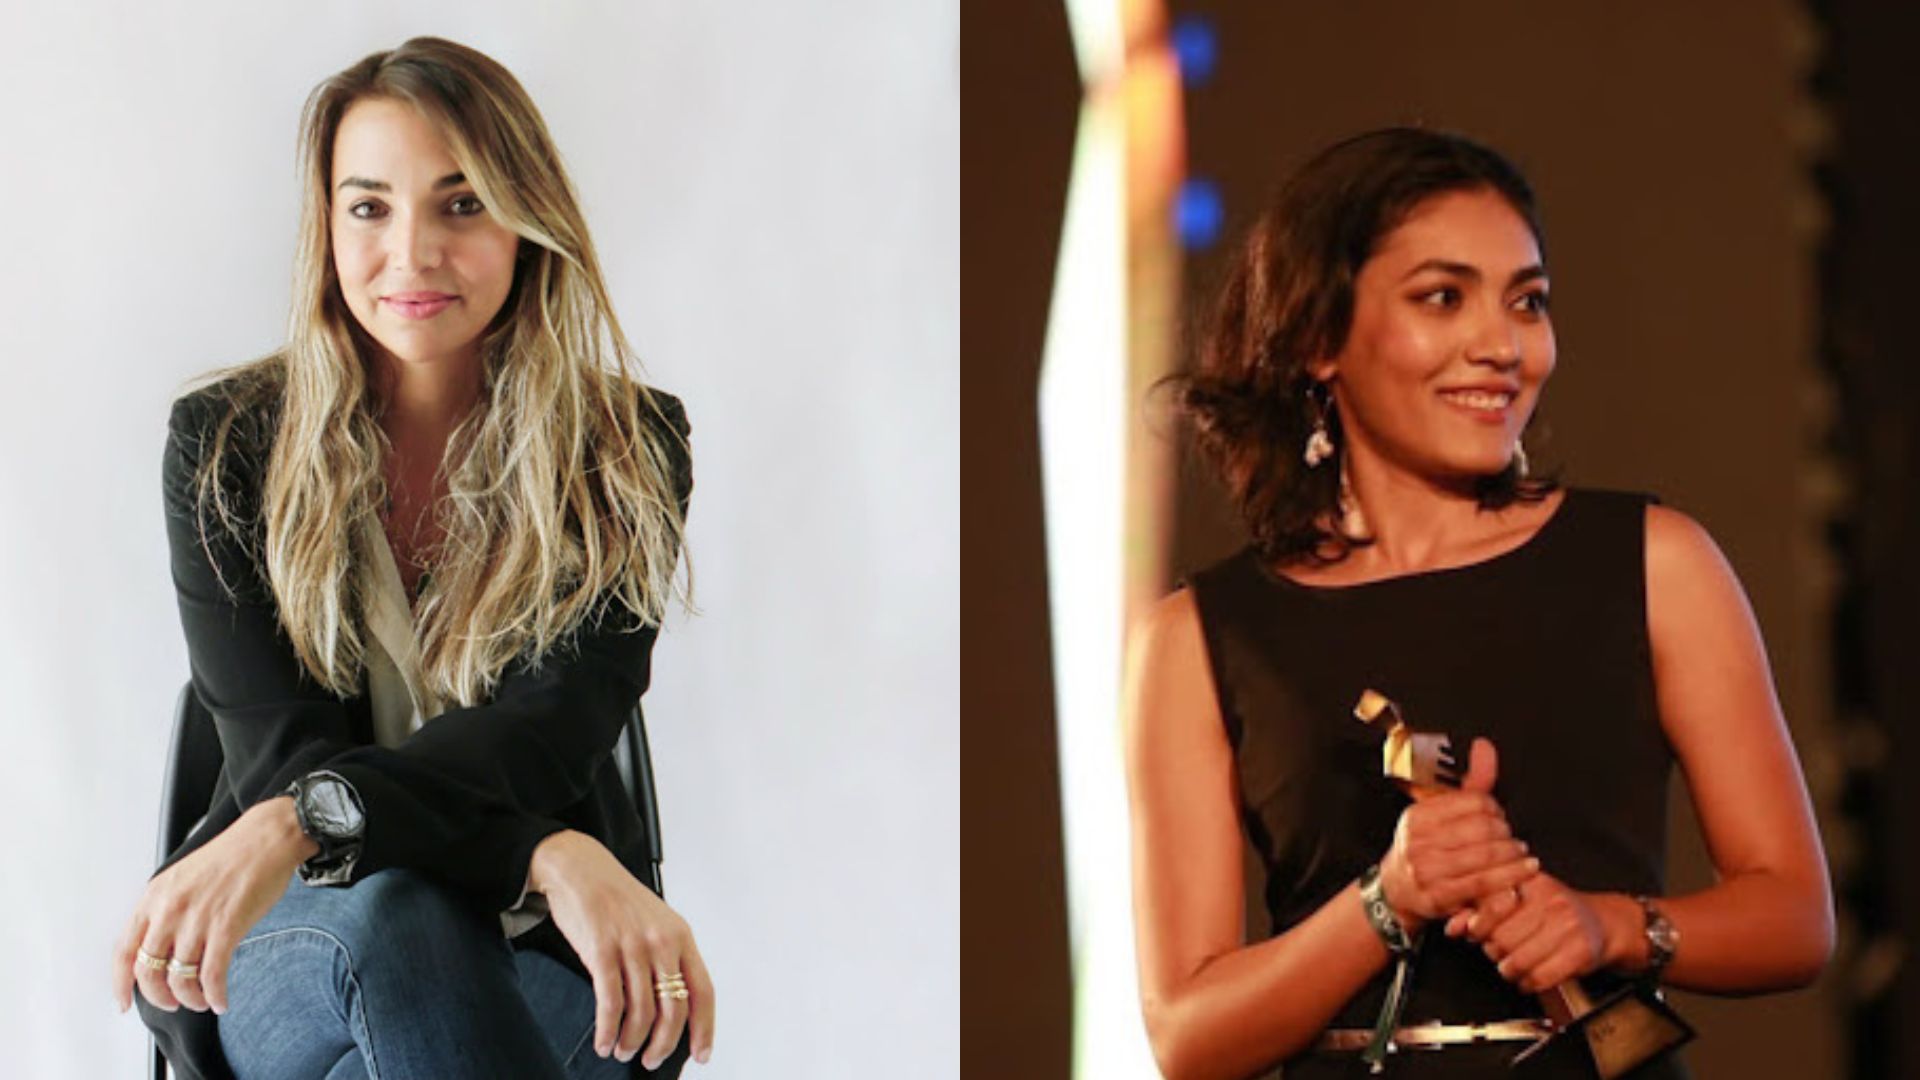 On the left, a picture of Dina Aly '04 crossing her legs while sitting on a chair and smiling at the camera; on the right, Fatma El Shenawy ‘14 stands on a stage and looks away from the camera while smiling and holding an award 